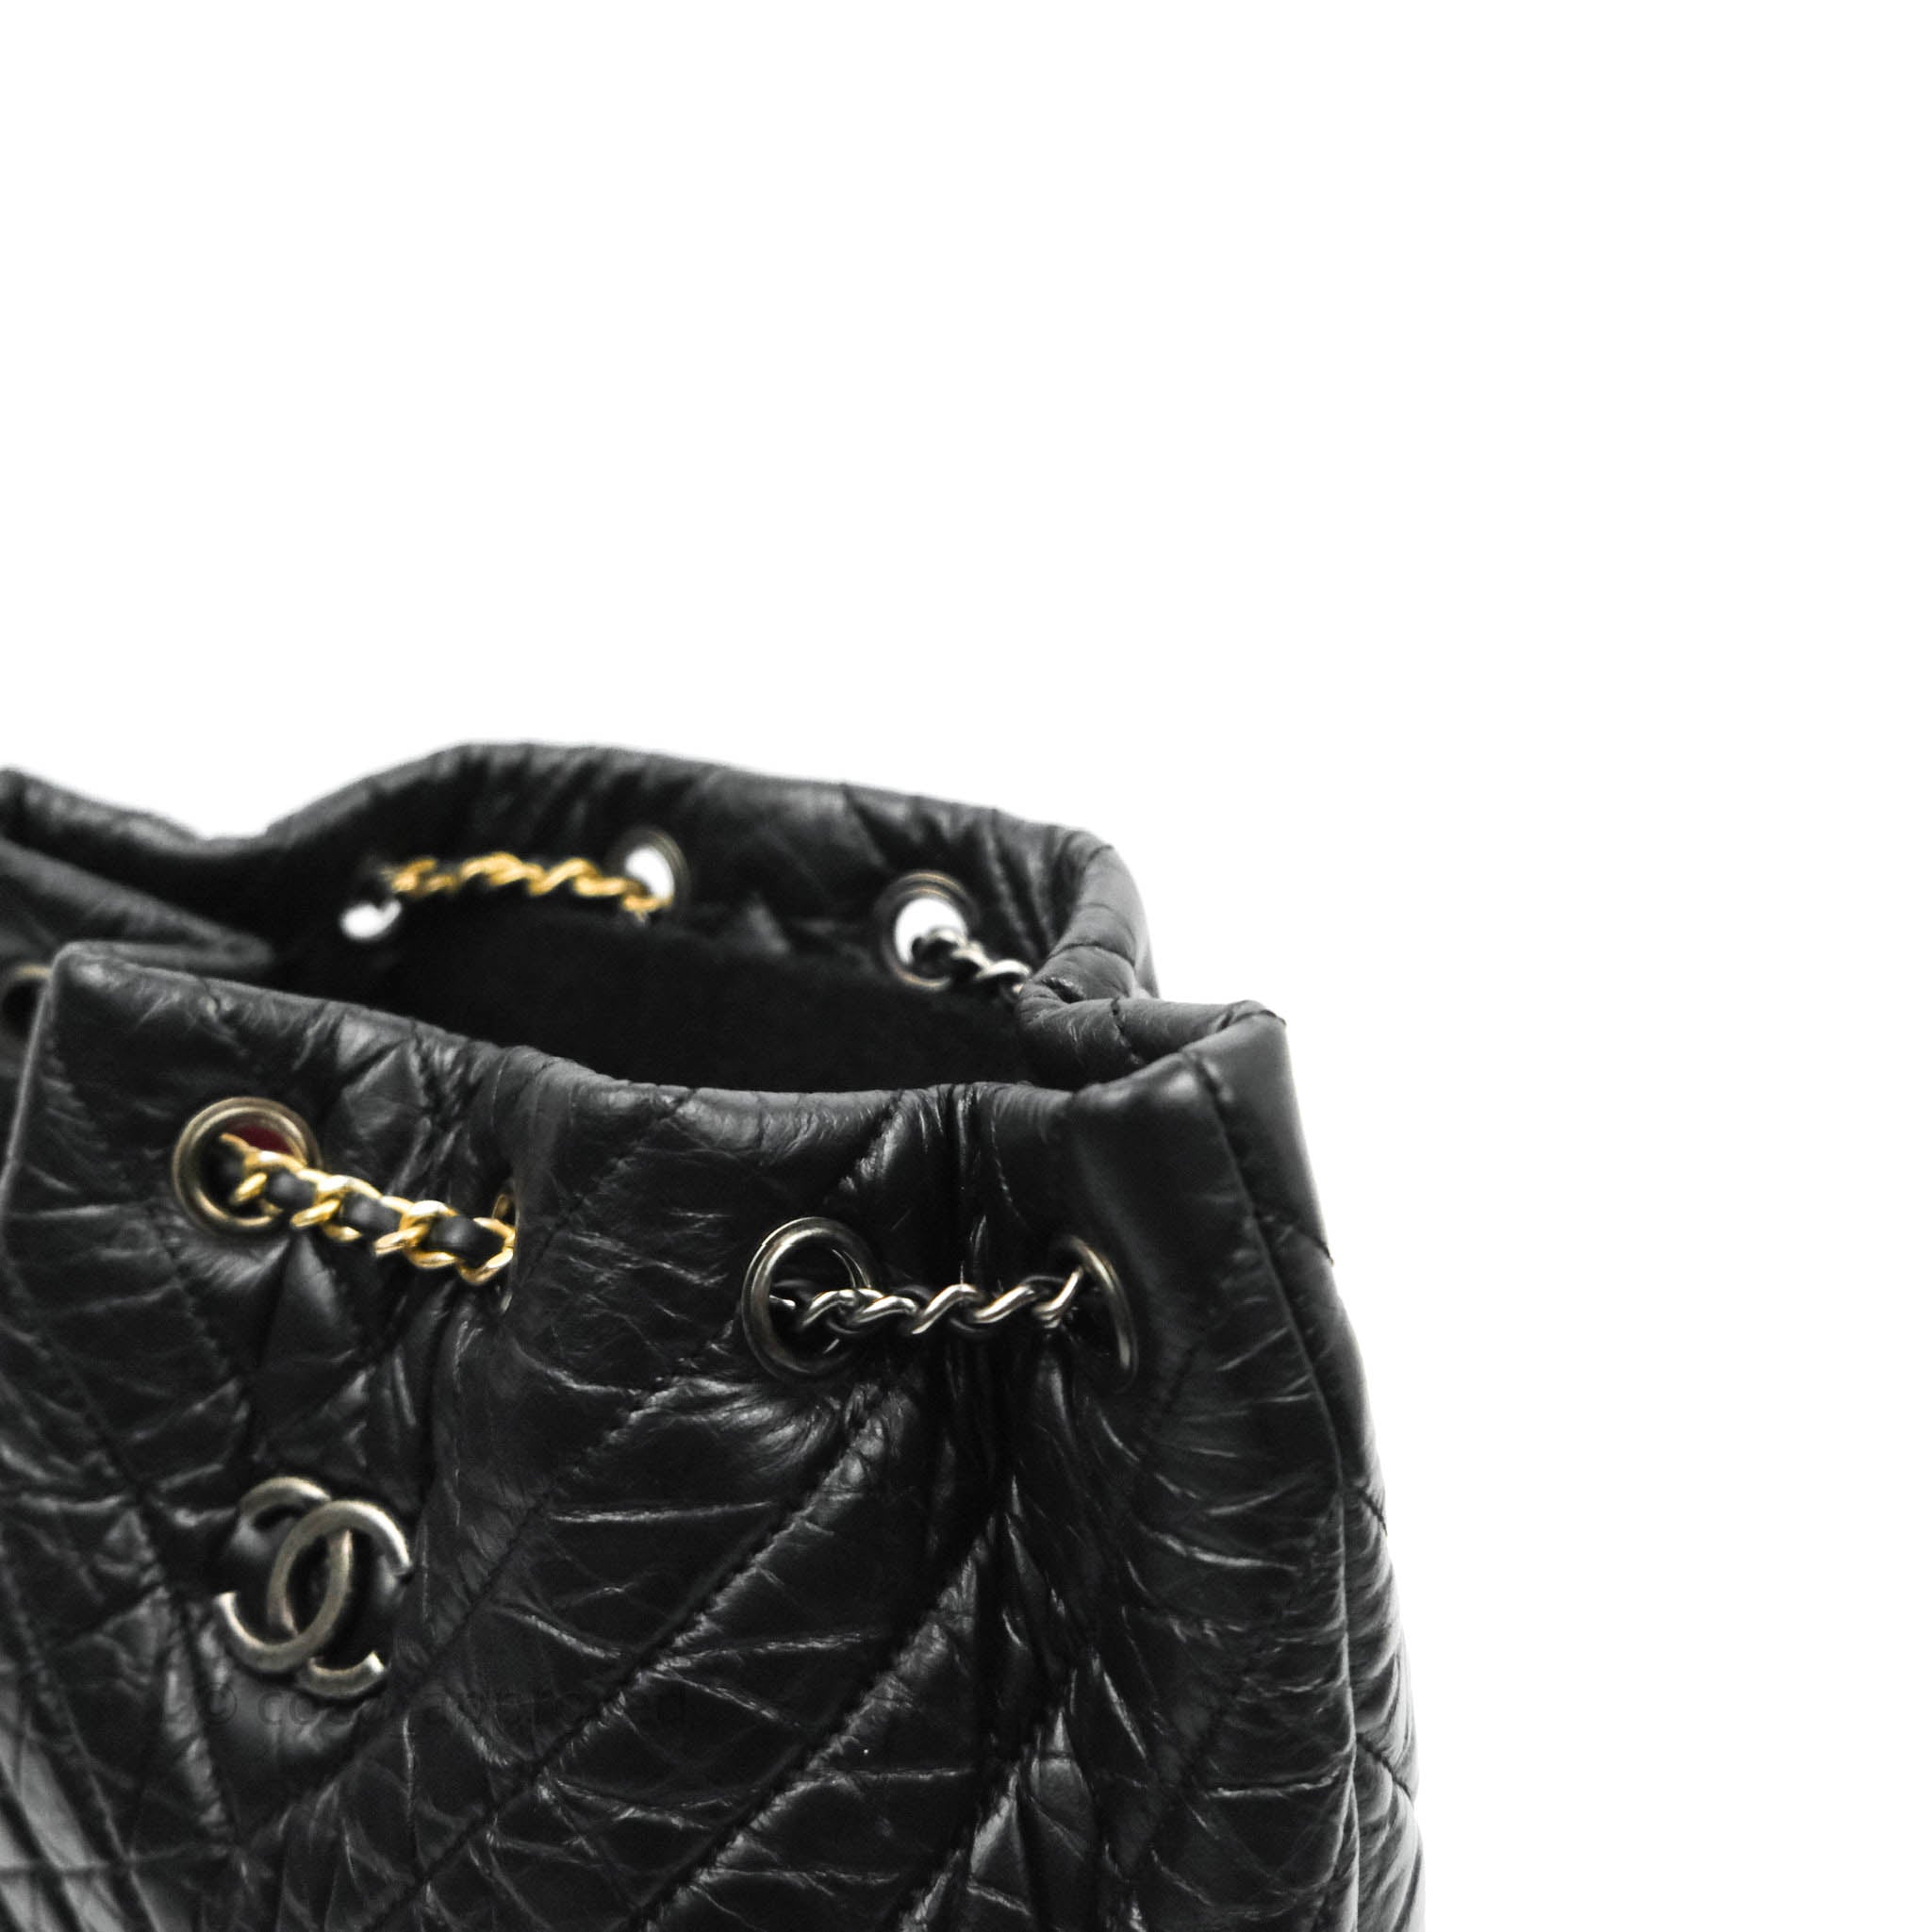 black chanel gabrielle backpack small